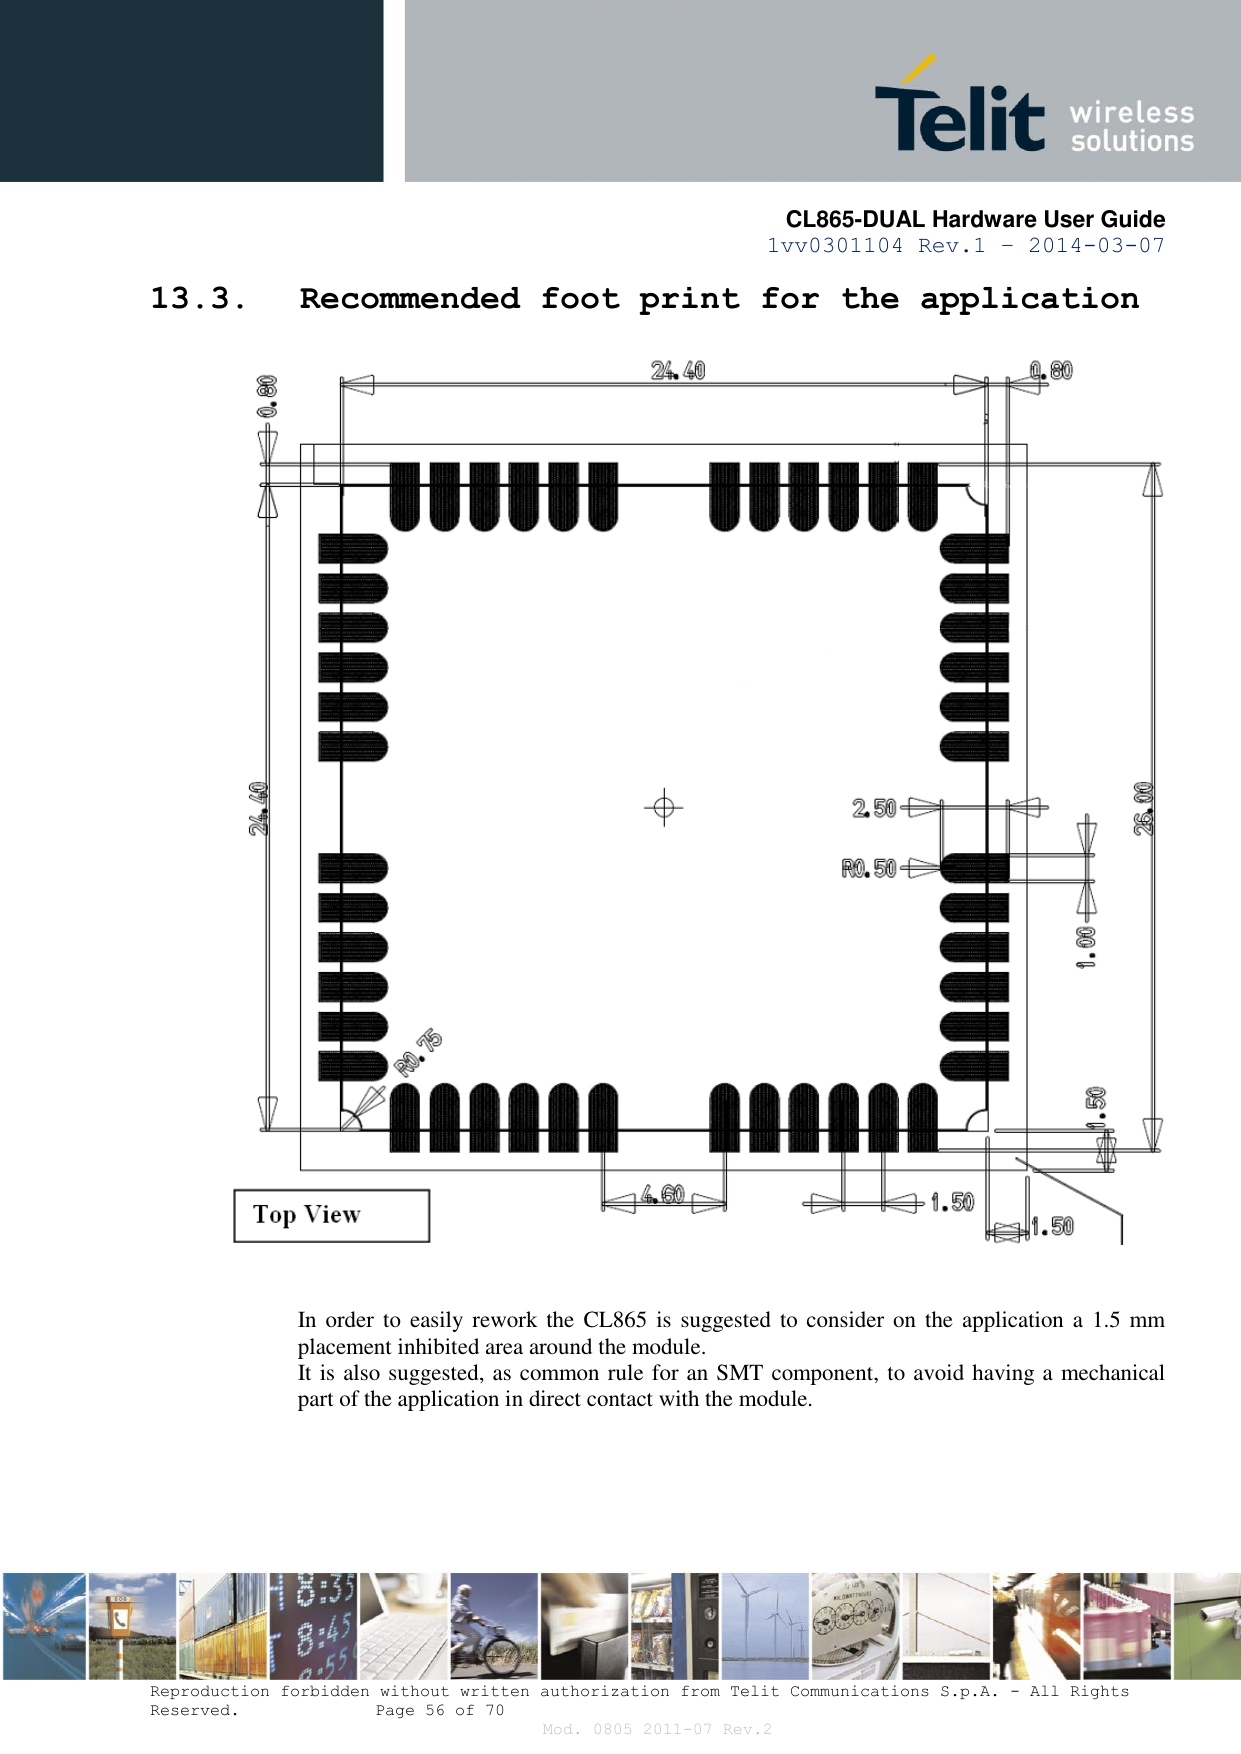       CL865-DUAL Hardware User Guide 1vv0301104 Rev.1 – 2014-03-07  Reproduction forbidden without written authorization from Telit Communications S.p.A. - All Rights Reserved.    Page 56 of 70 Mod. 0805 2011-07 Rev.2 13.3. Recommended foot print for the application    In order  to easily rework the  CL865 is suggested to consider on  the  application a 1.5  mm placement inhibited area around the module. It is also suggested, as common rule for an SMT component, to avoid having a mechanical part of the application in direct contact with the module.   